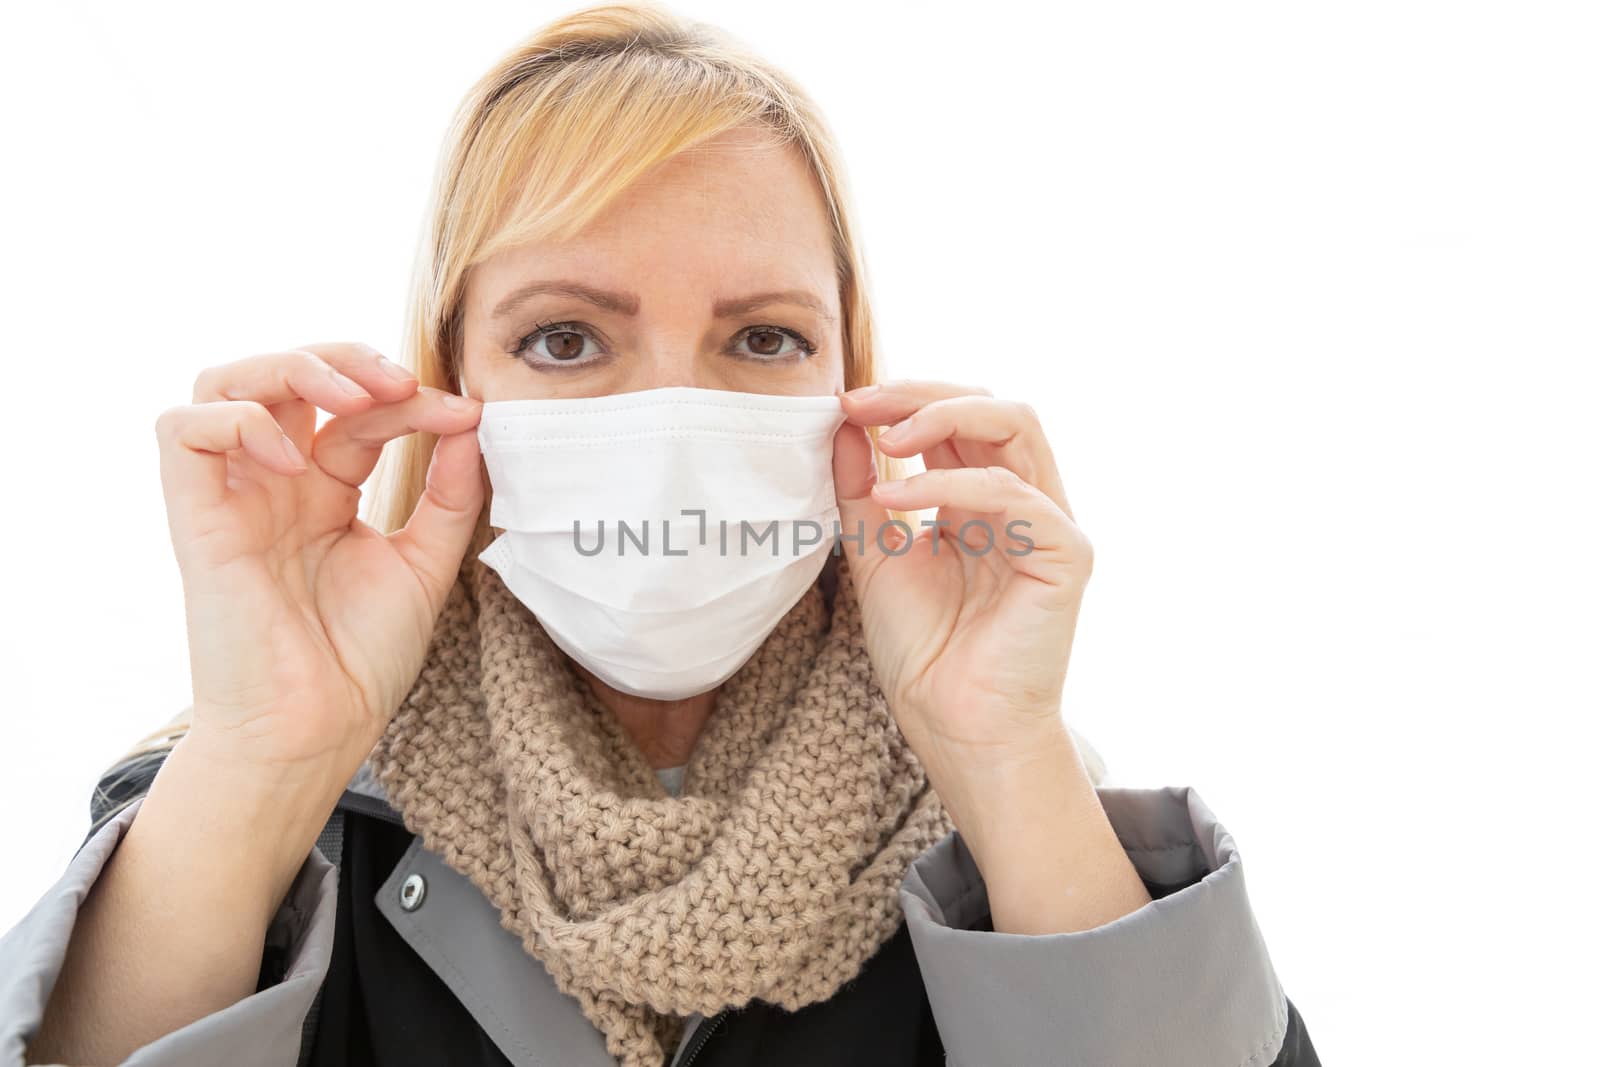 Young Adult Woman Wearing Face Mask Isolated on White Background.